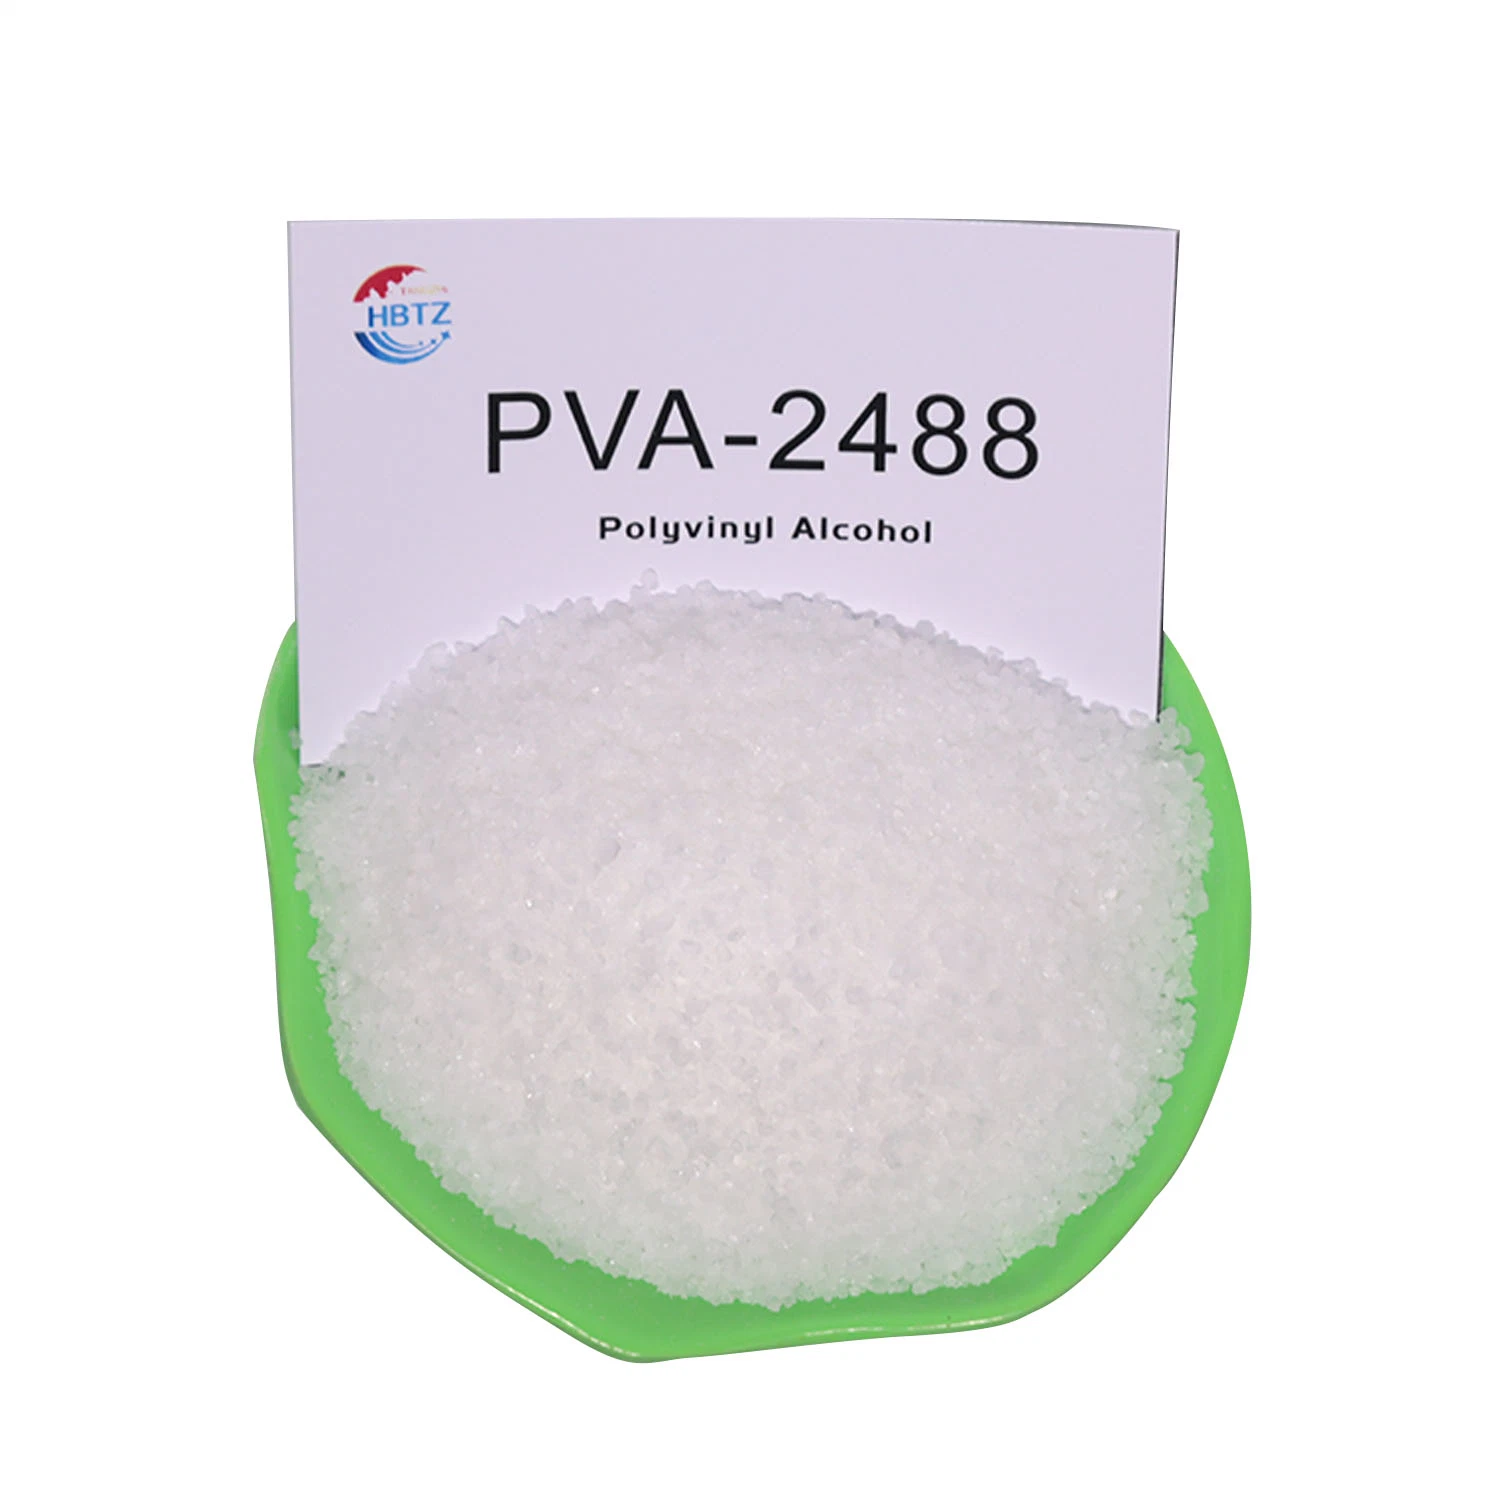 Hot Selling with Competitive Price CAS No: 9002-89-5 Polyvinyl Alcohol/PVA 0588 1788 2488 2688 1799 2099 2699